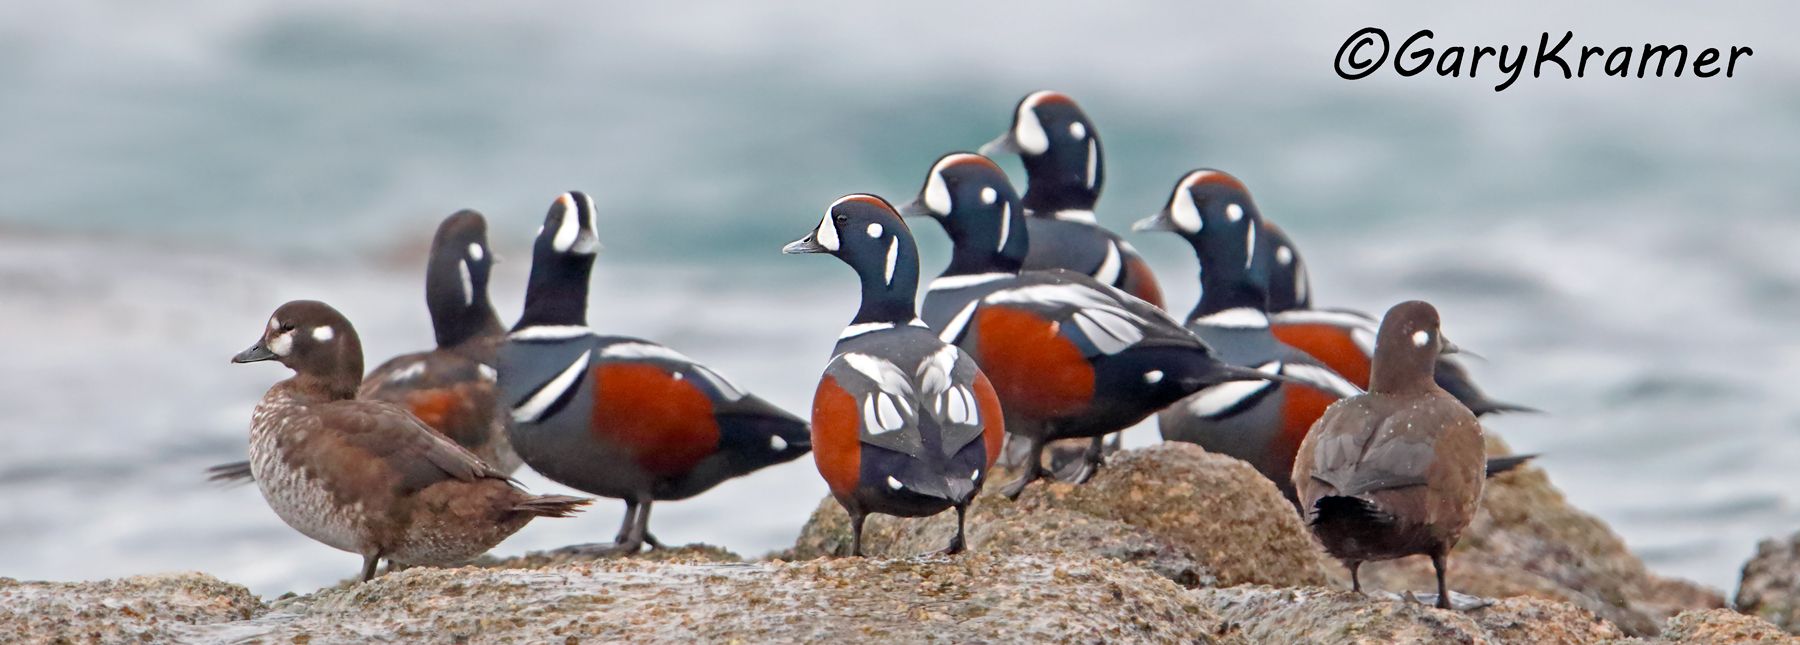 Harlequin Duck (Histrionicus histrionicus) - NBWH#286d(P)